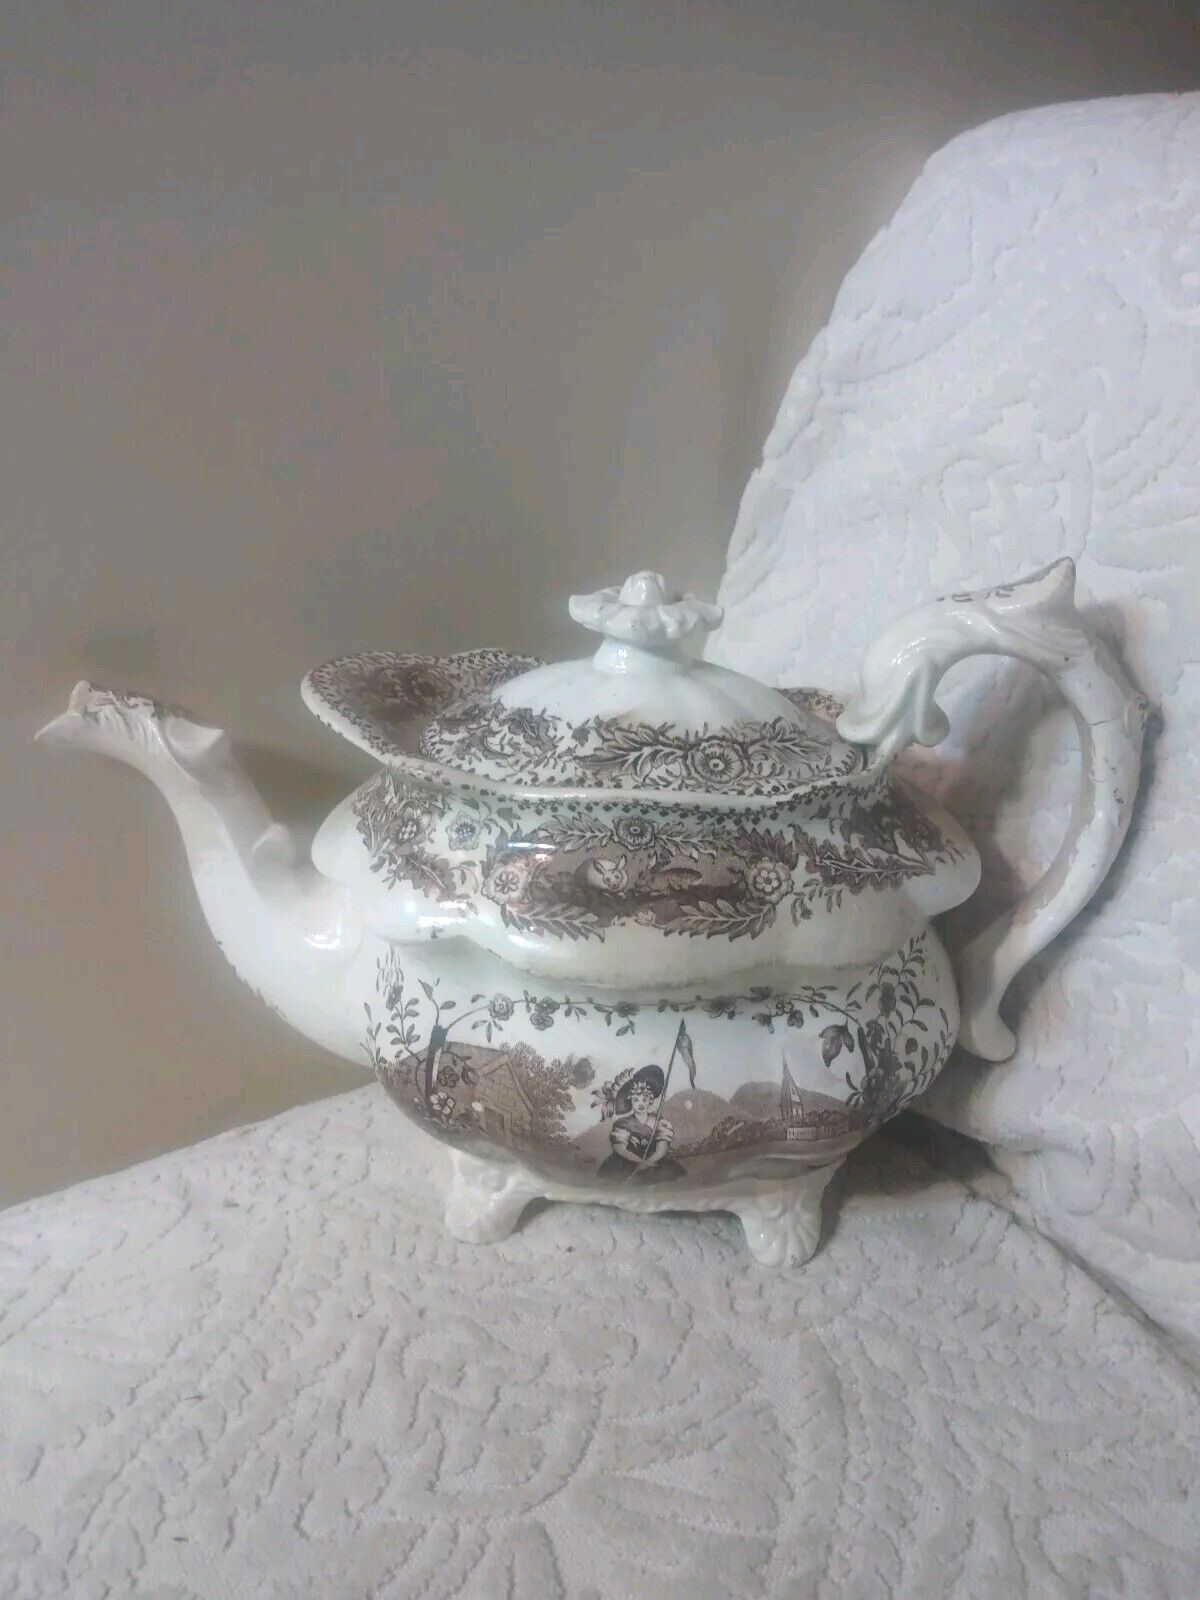 Antique Staffordshire Eng Porcelain Transferware Teapot Lid Feet As-Found Lovely